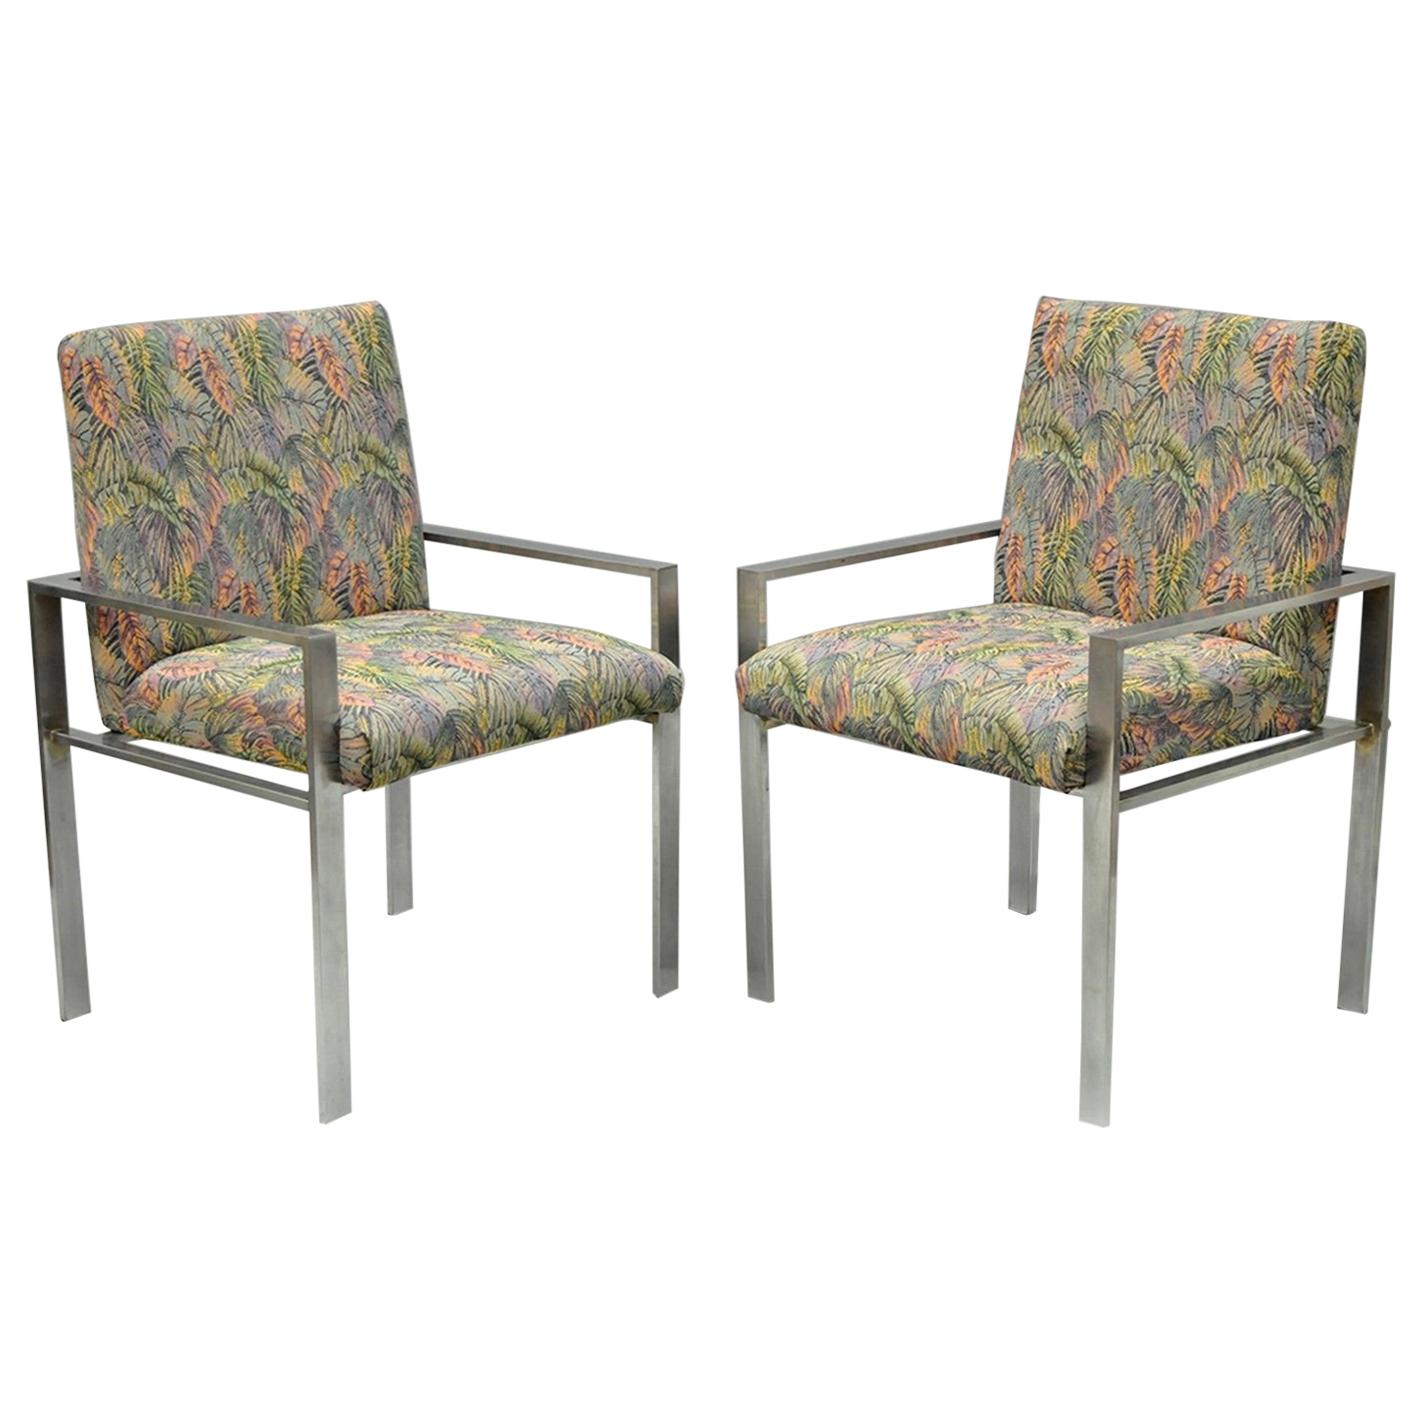 Pair of Harvey Probber Attributed Aluminum Lounge Armchairs, Mid-Century Modern